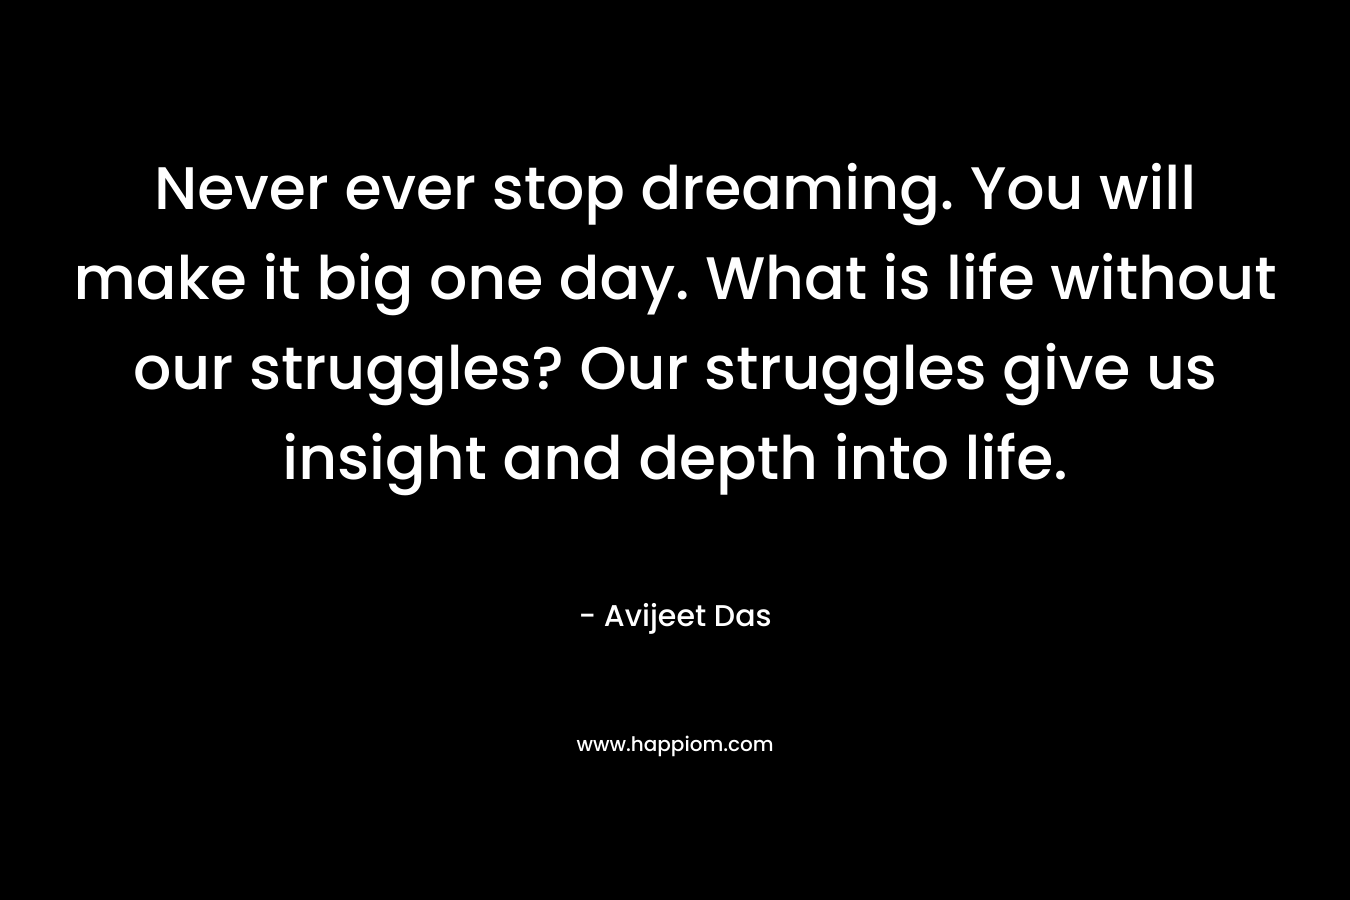 Never ever stop dreaming. You will make it big one day. What is life without our struggles? Our struggles give us insight and depth into life. – Avijeet Das